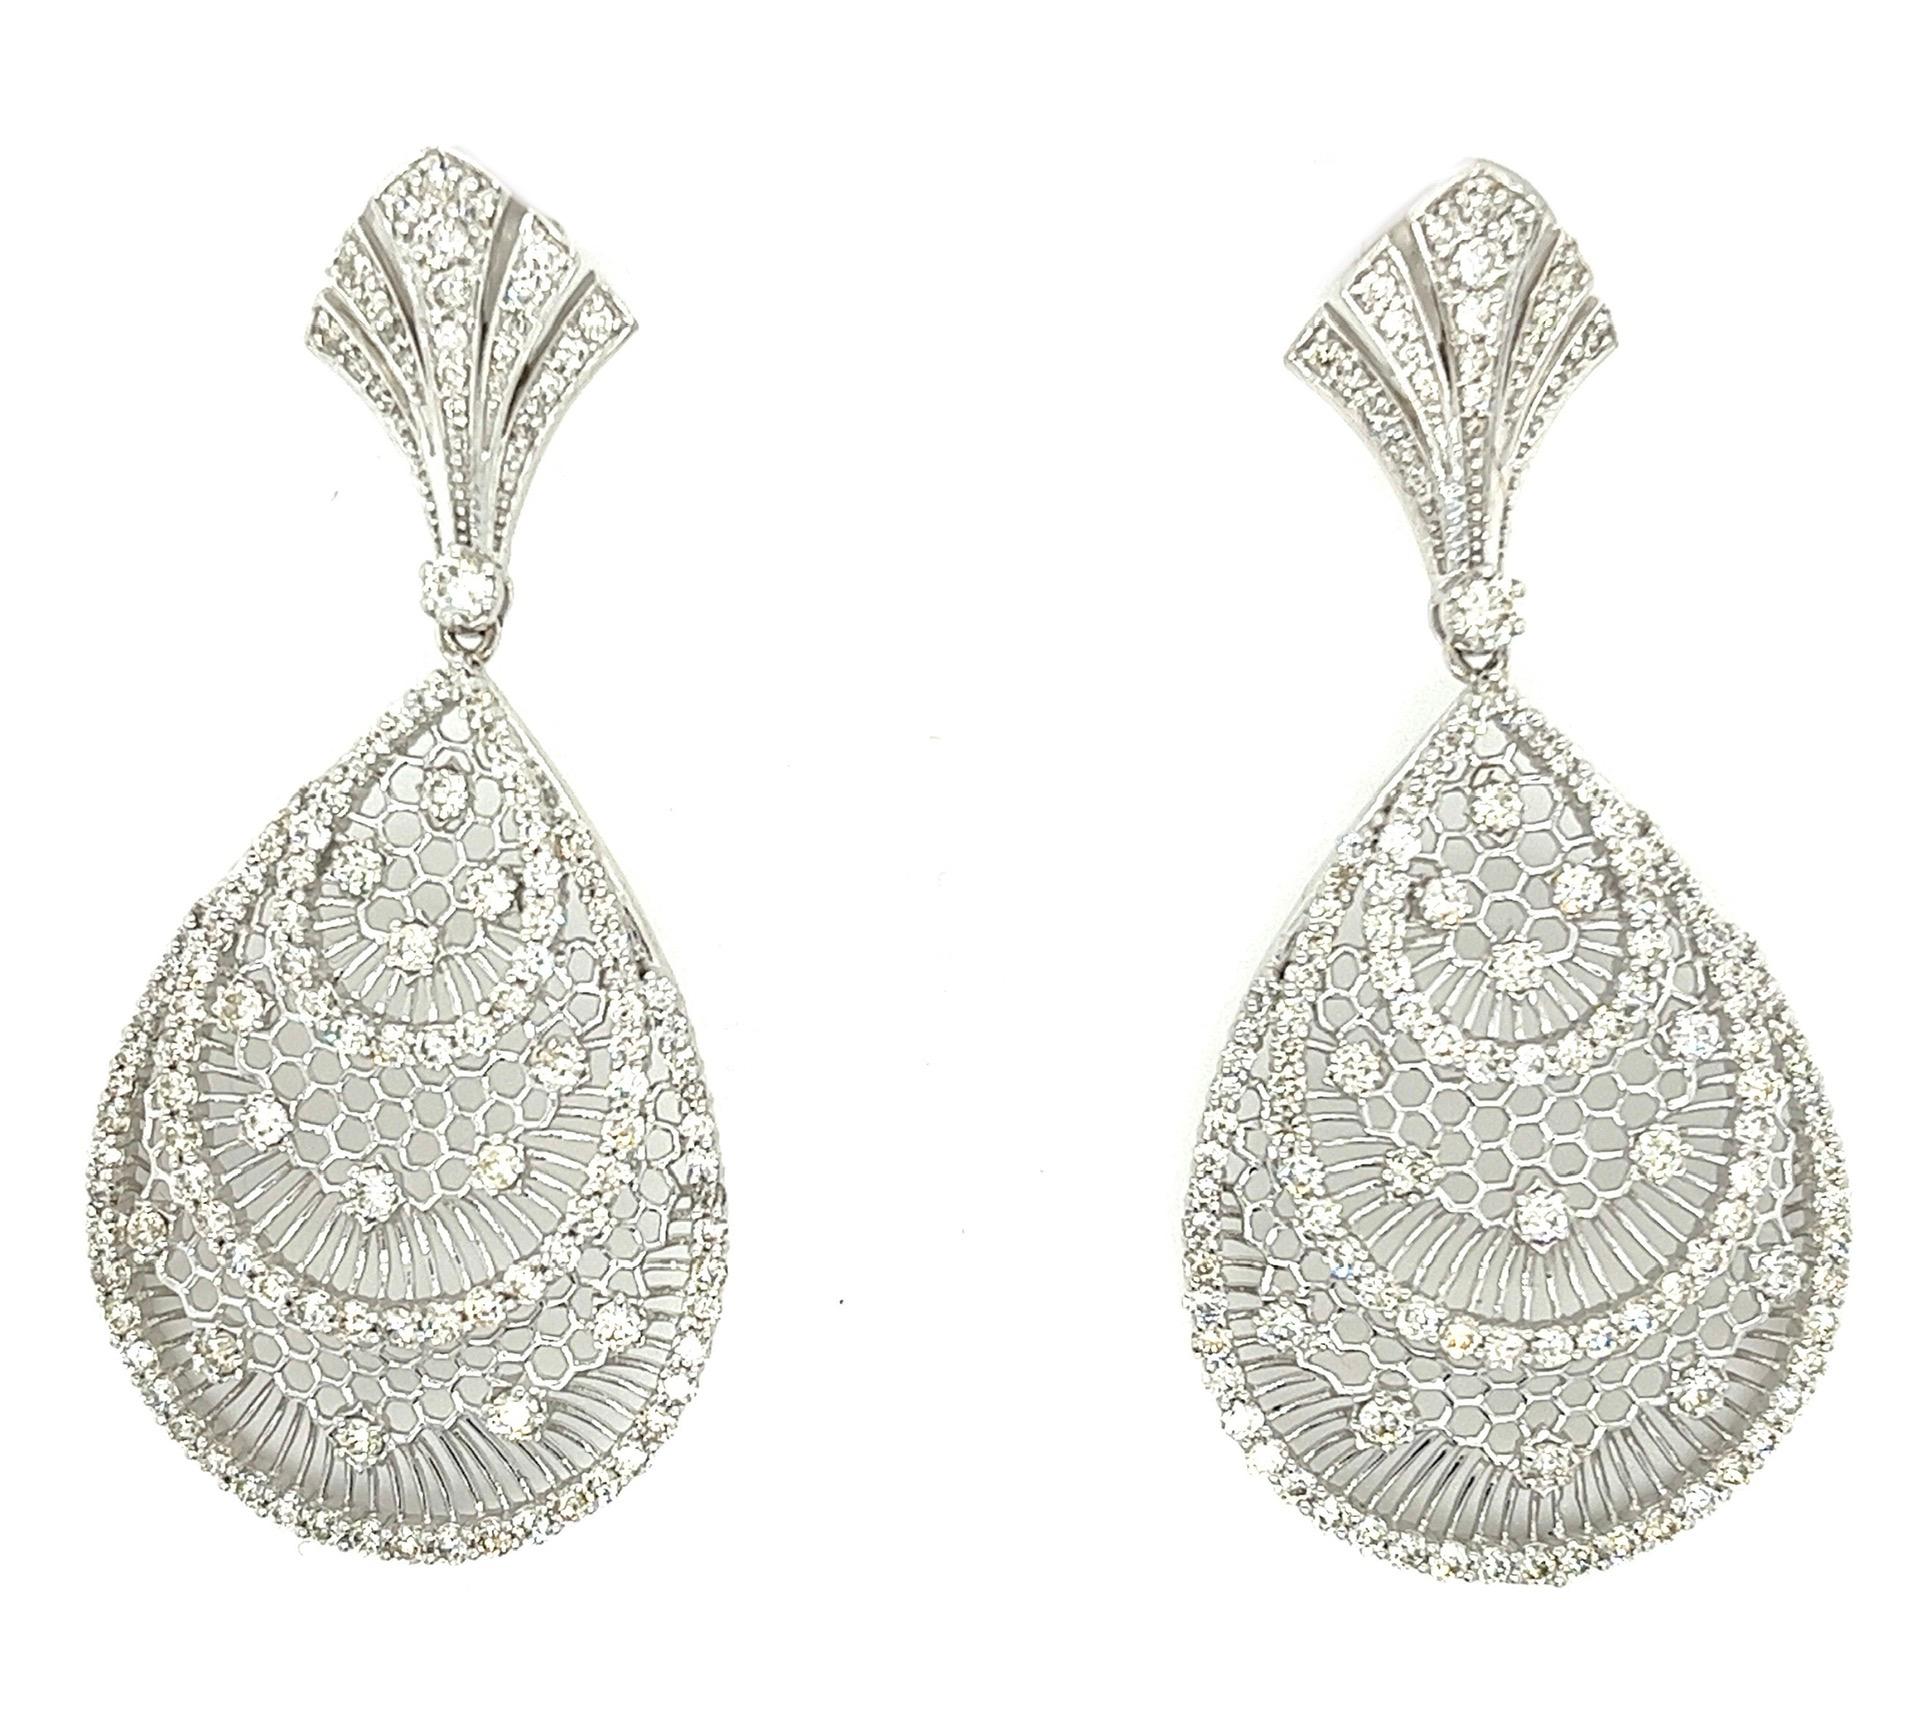 18K White Gold Earrings with Diamonds
18K White Gold - 13.00 GM
278 Diamonds - 3.43 CT
Indulge in the exquisite elegance of Althoff Jewelry 18K gold diamond drop earrings, meticulously crafted to embody the graceful beauty reminiscent of a palace